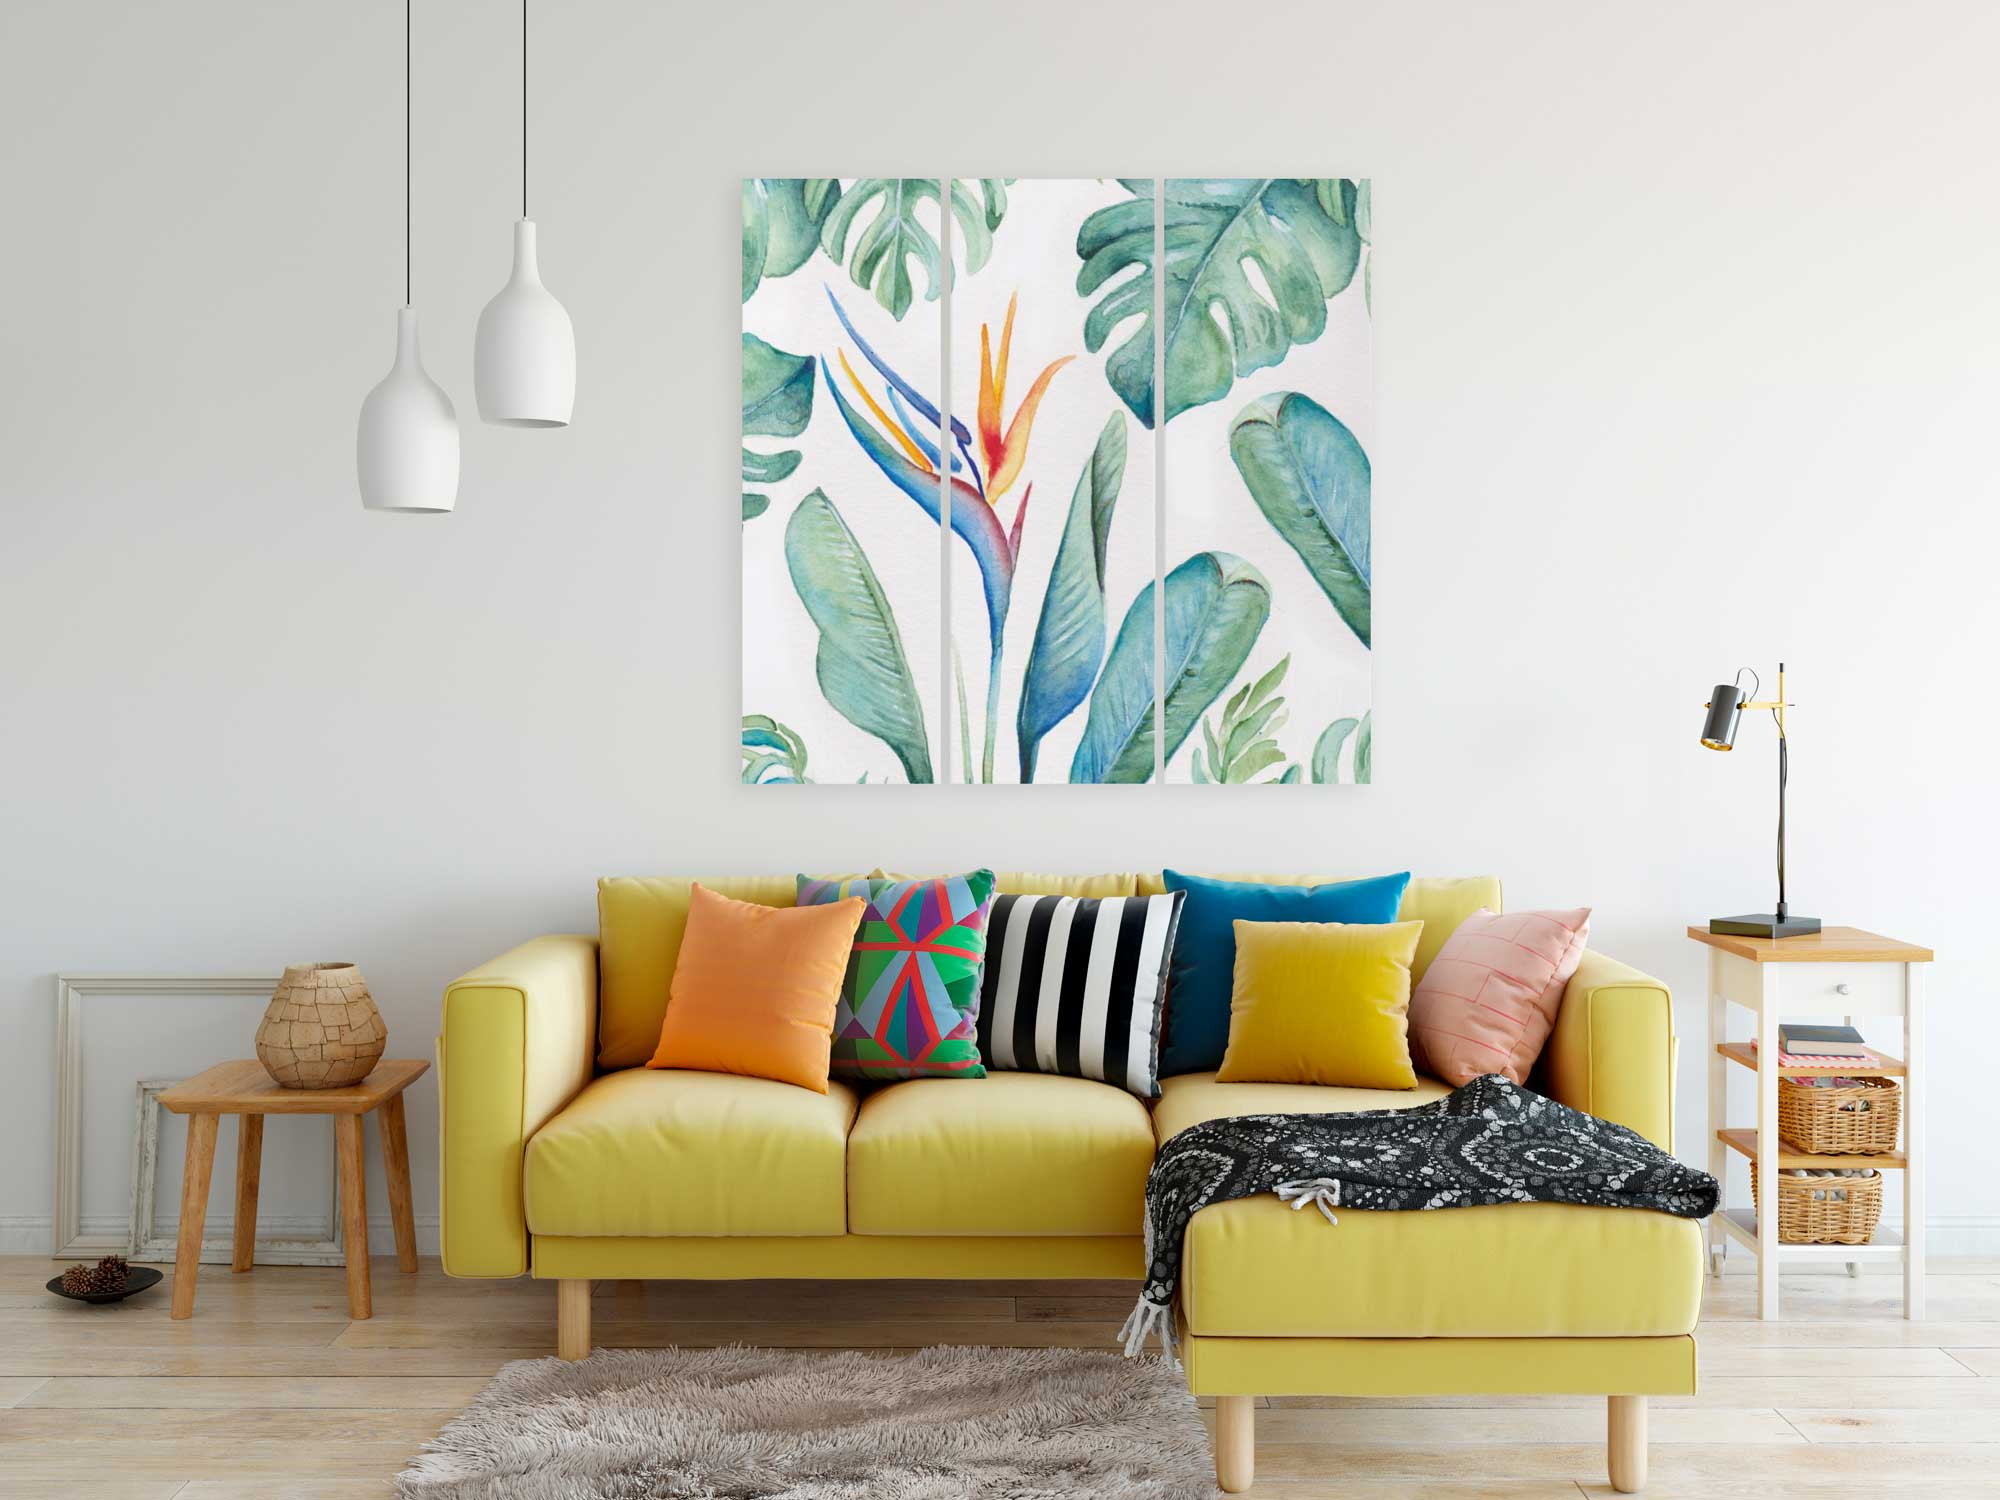 Watercolor Monstera Palm Leaves and Bird of Paradise Flower Triptych print by Victoria Grigaliunas of Victoria Rigali Designs. The art print features tropical florals and foliage in colorful shades of blue, orange and greens. 